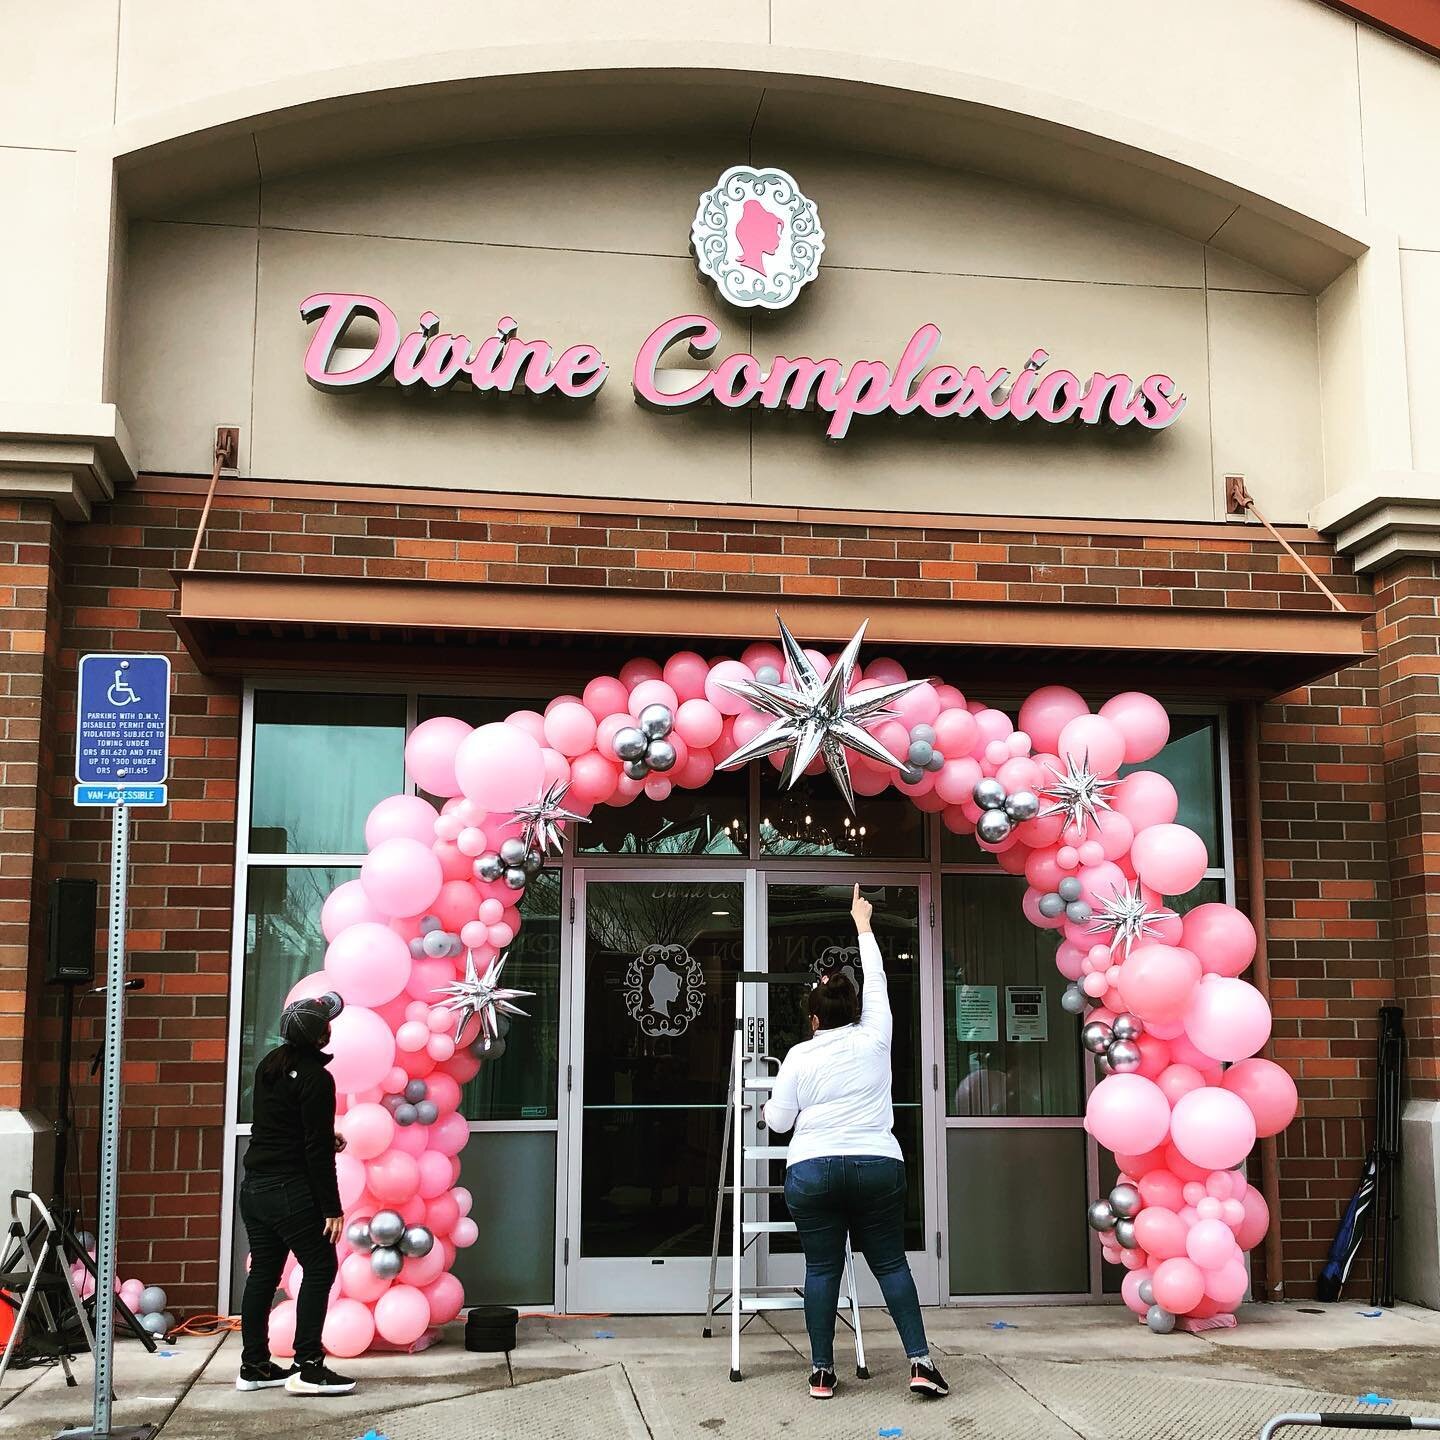 We are so excited to have our friends as neighbors to our Wilsonville @koifusionpdx location.  Come check out @divine_complexions for all you Beauty needs!!! 💁🏻&zwj;♀️
#getsumbotox #neighborlylove